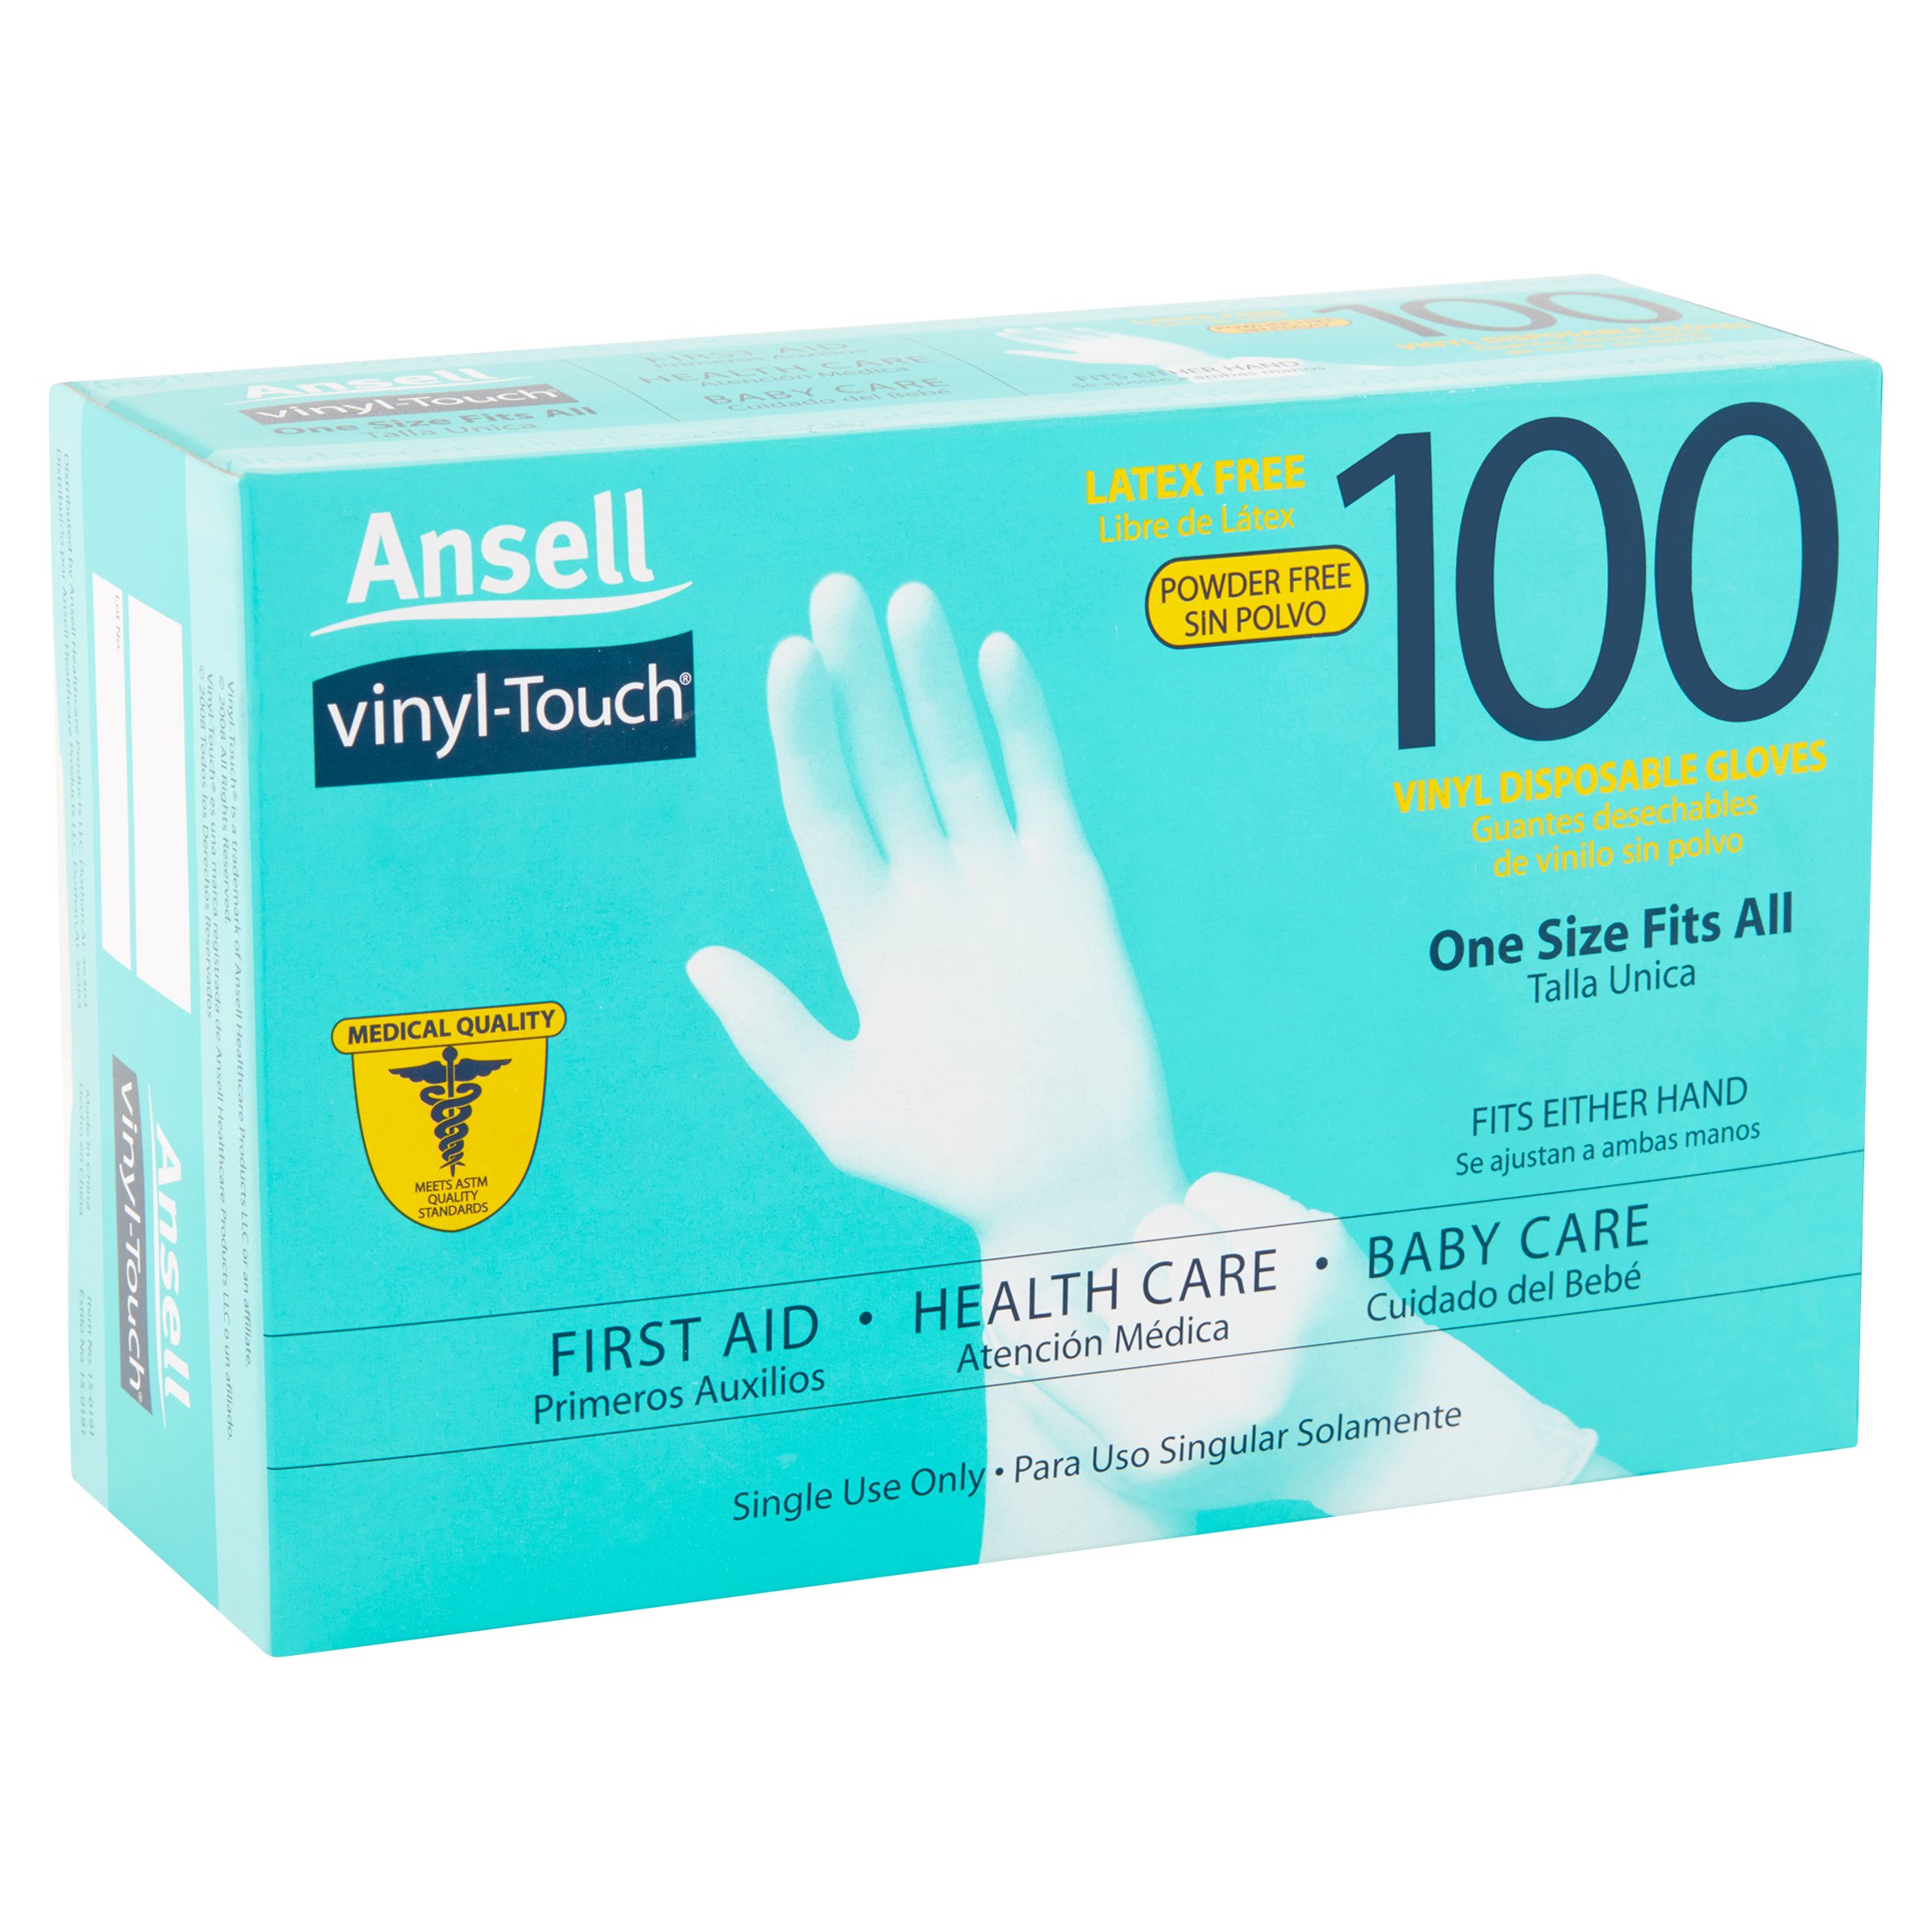 Ansell Vinyl Touch Gloves – Multi-Purpose, Disposable, Latex-Free, One Size Fits All! 100ct Gloves - image 2 of 4